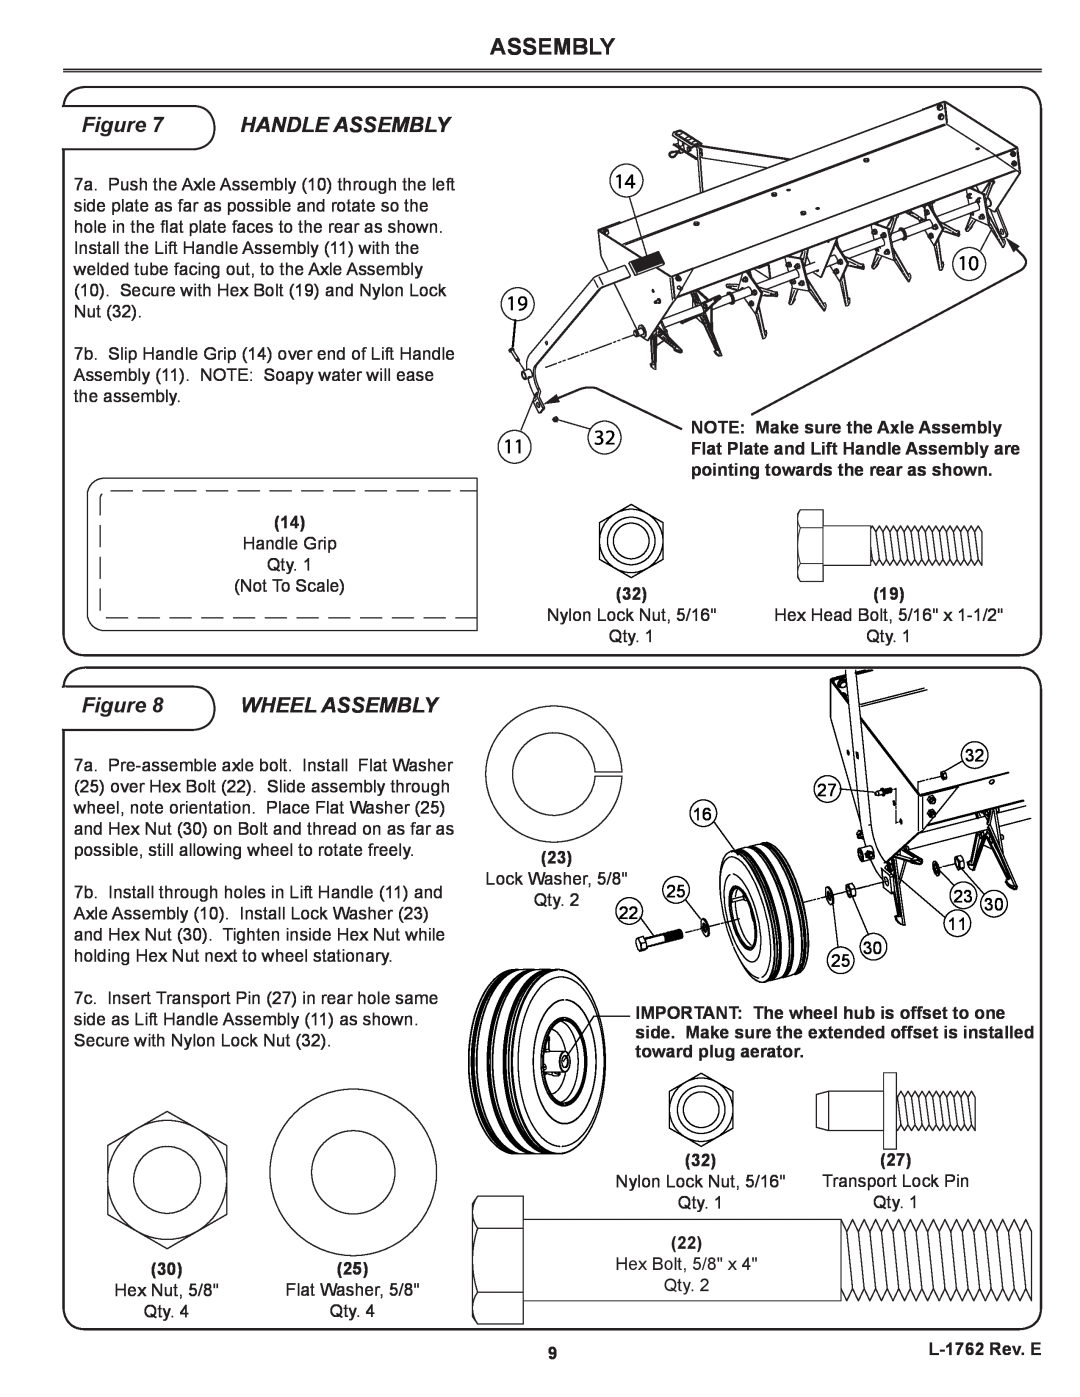 Brinly-Hardy PA-40 BH, PA-48 BH owner manual Handle Assembly, Wheel Assembly, 32 27 23 11 25 